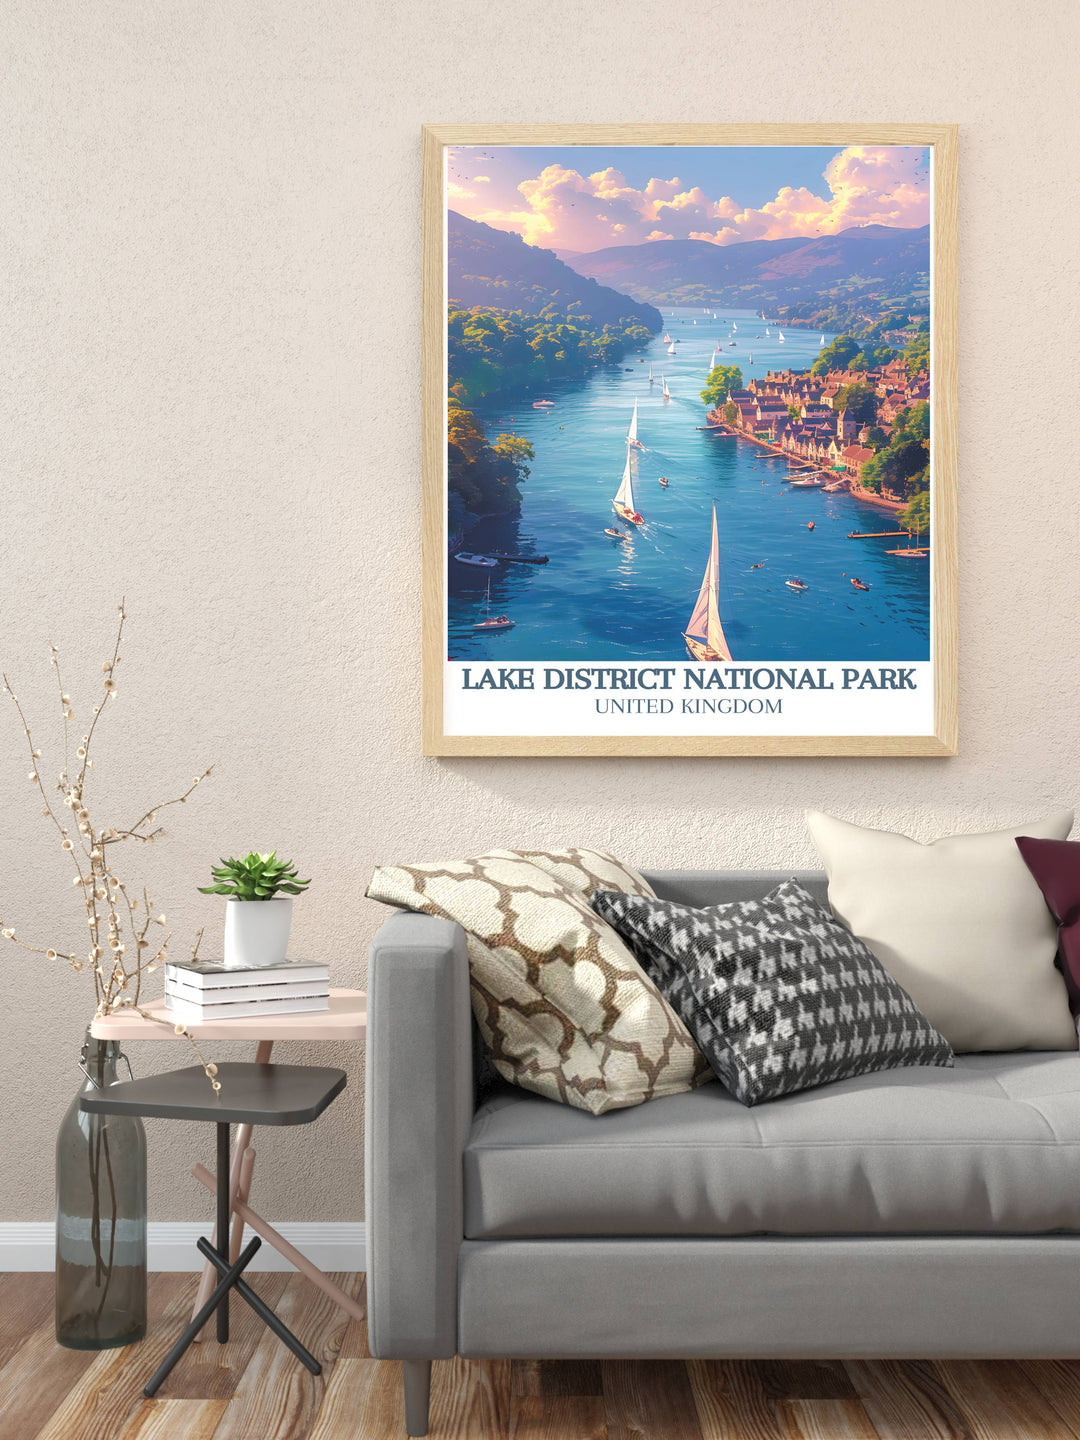 Gallery wall art capturing the expansive countryside of the Lake District, ideal for those who appreciate panoramic natural scenes.